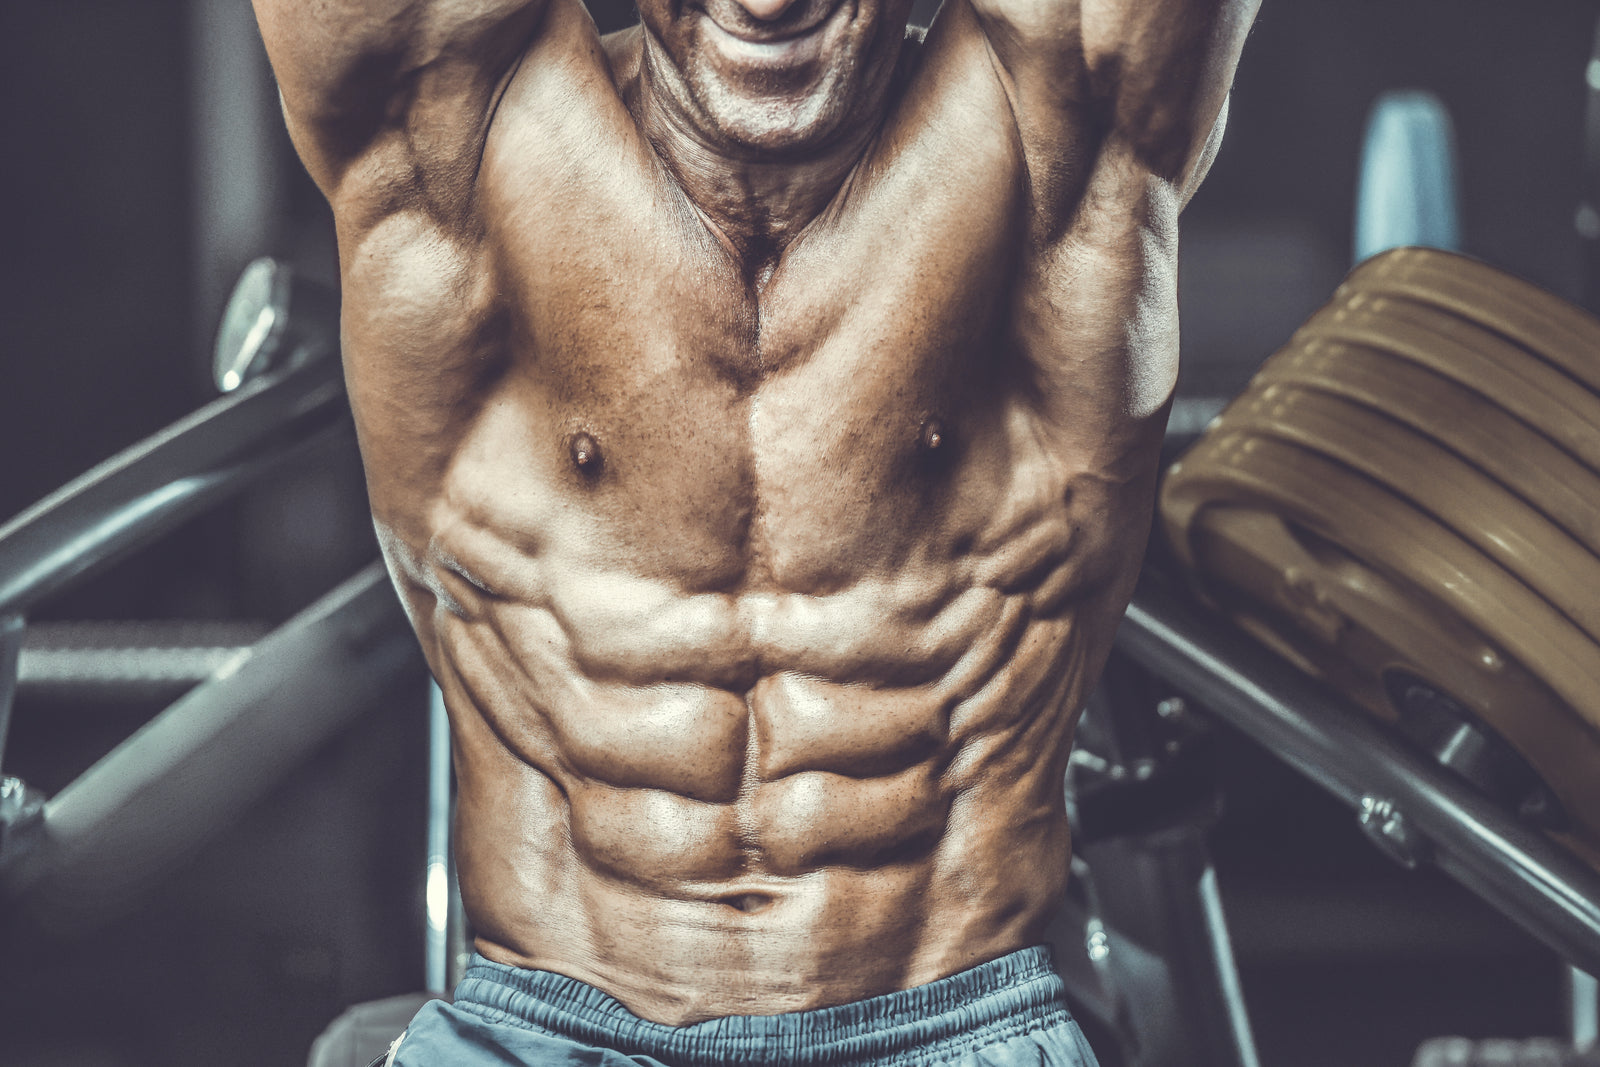 Best 5 Exercises UPPER ABS - RECTUS ABDOMINIS Workout - SHREDDED BODY 